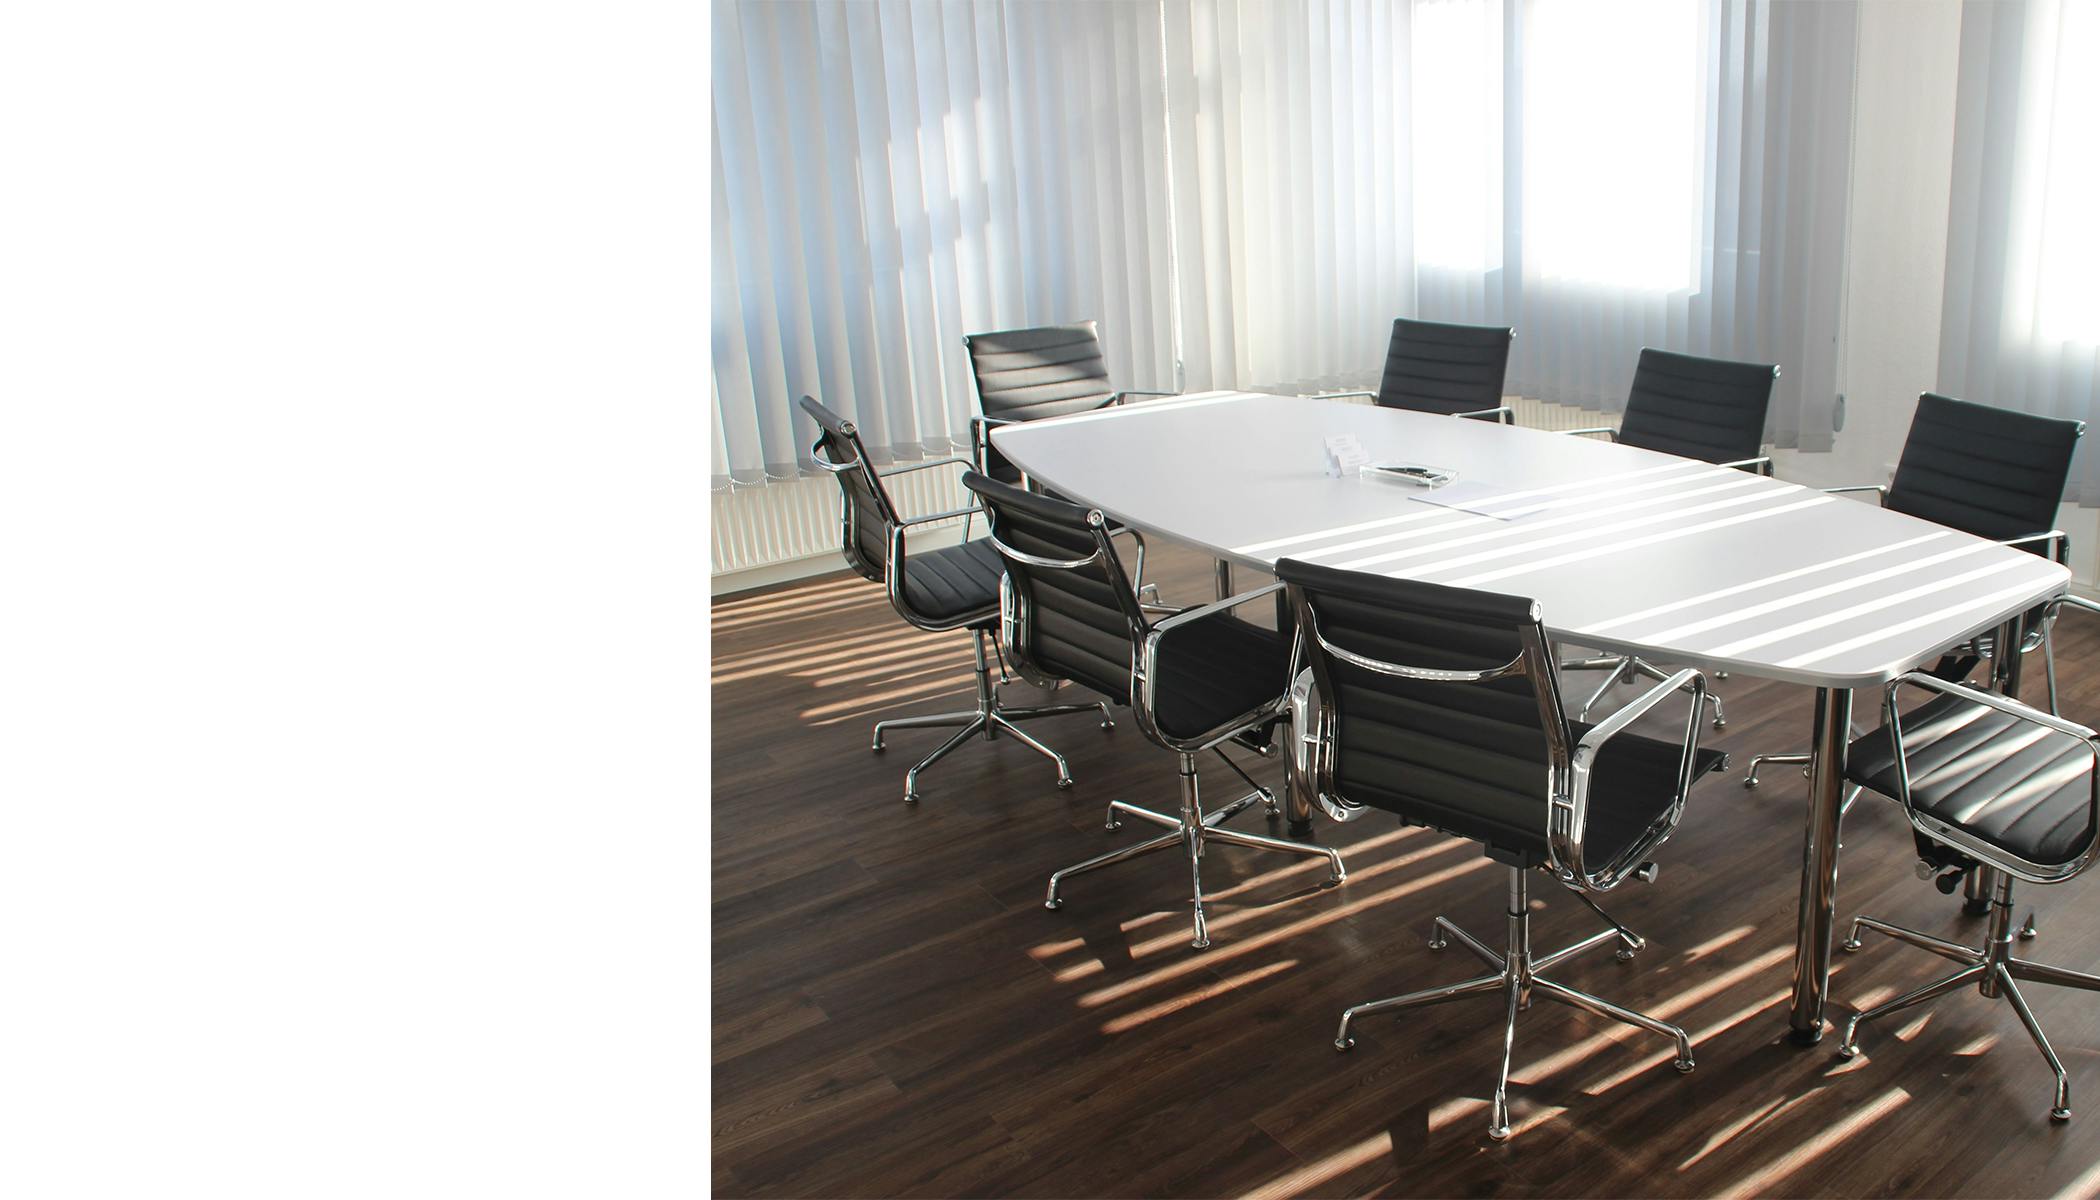 Photo of board room conference table and chairs